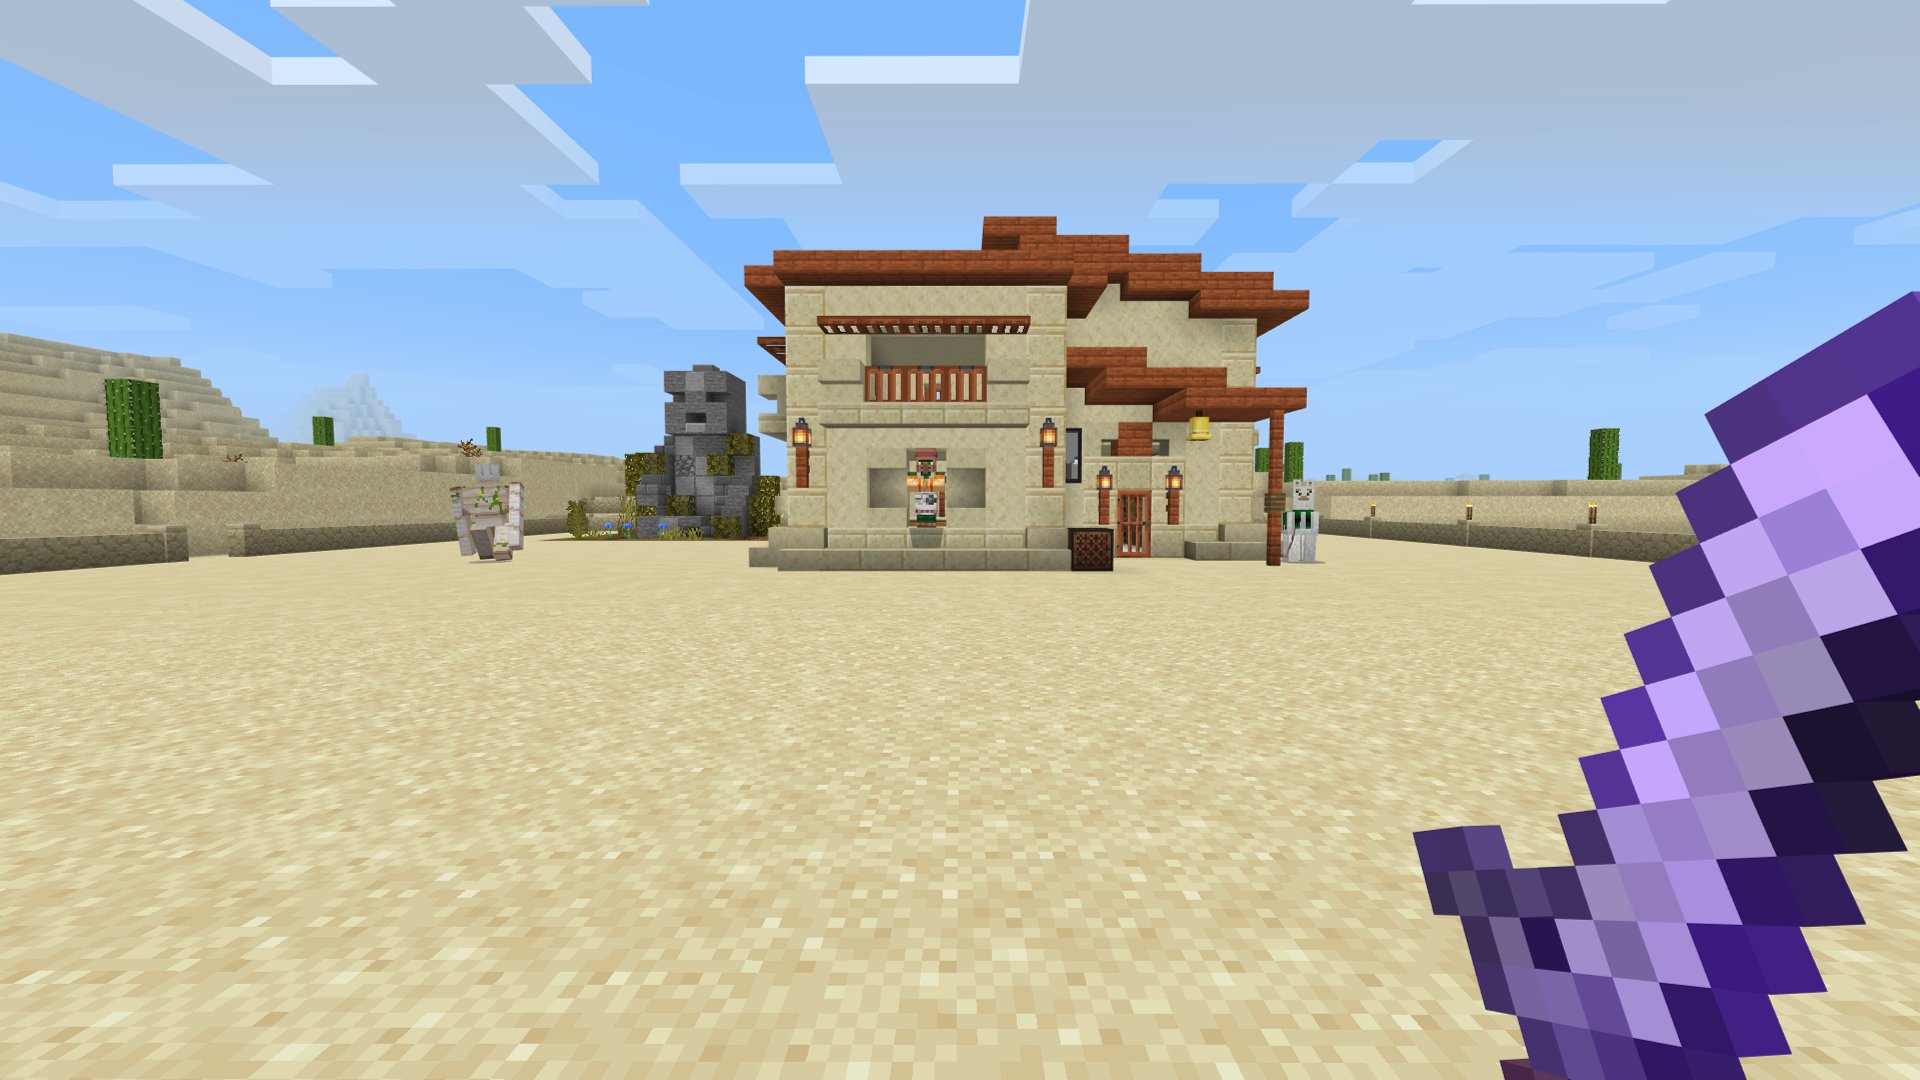 Ben Walke Starting To Build Up The Minecraft Base Don T Usually Settle In A Desert Biome So Trying Something New